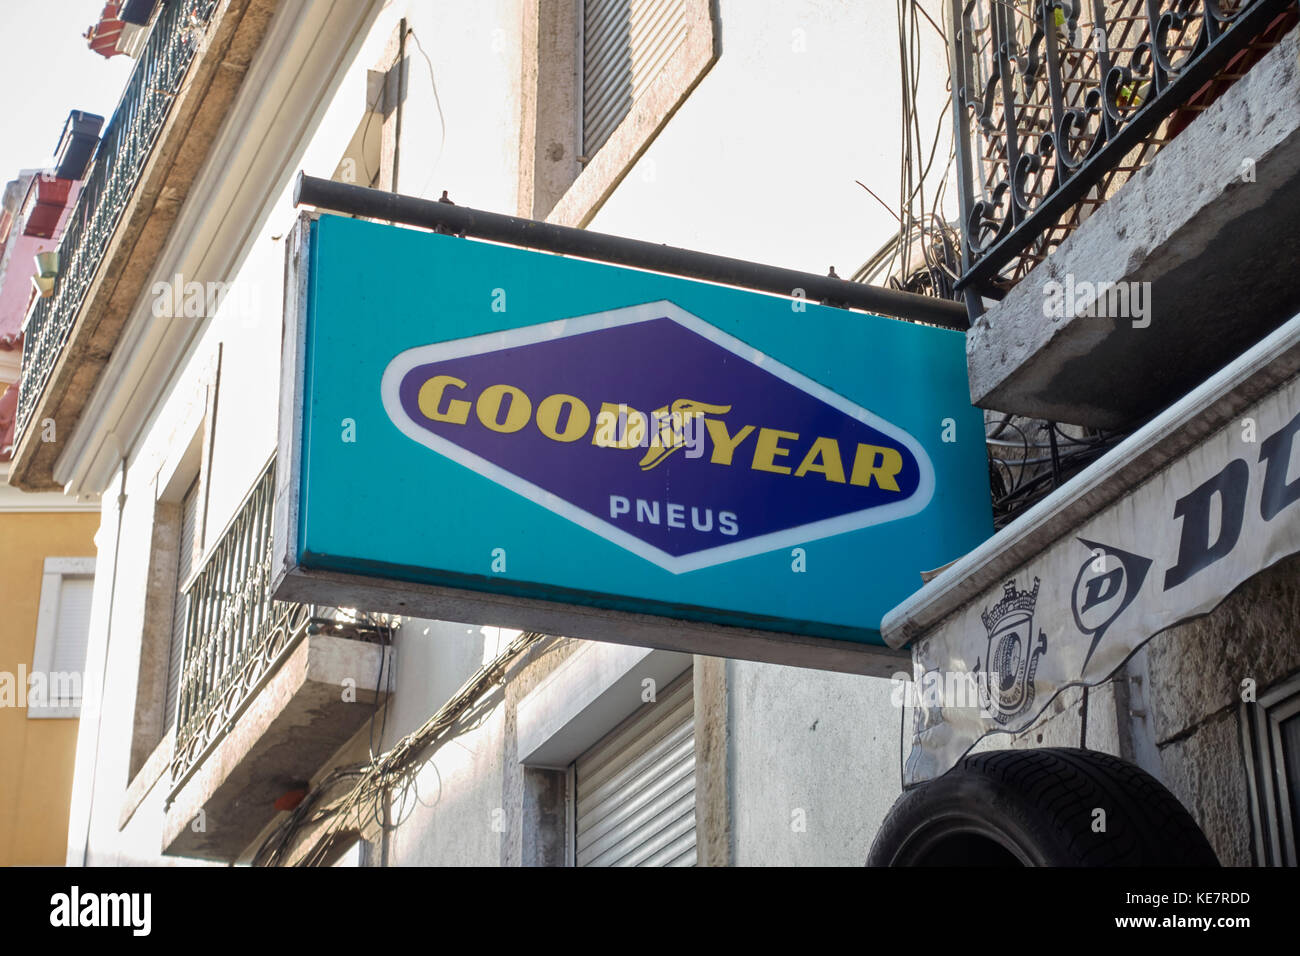 Goodyear tires sign board of a store Stock Photo